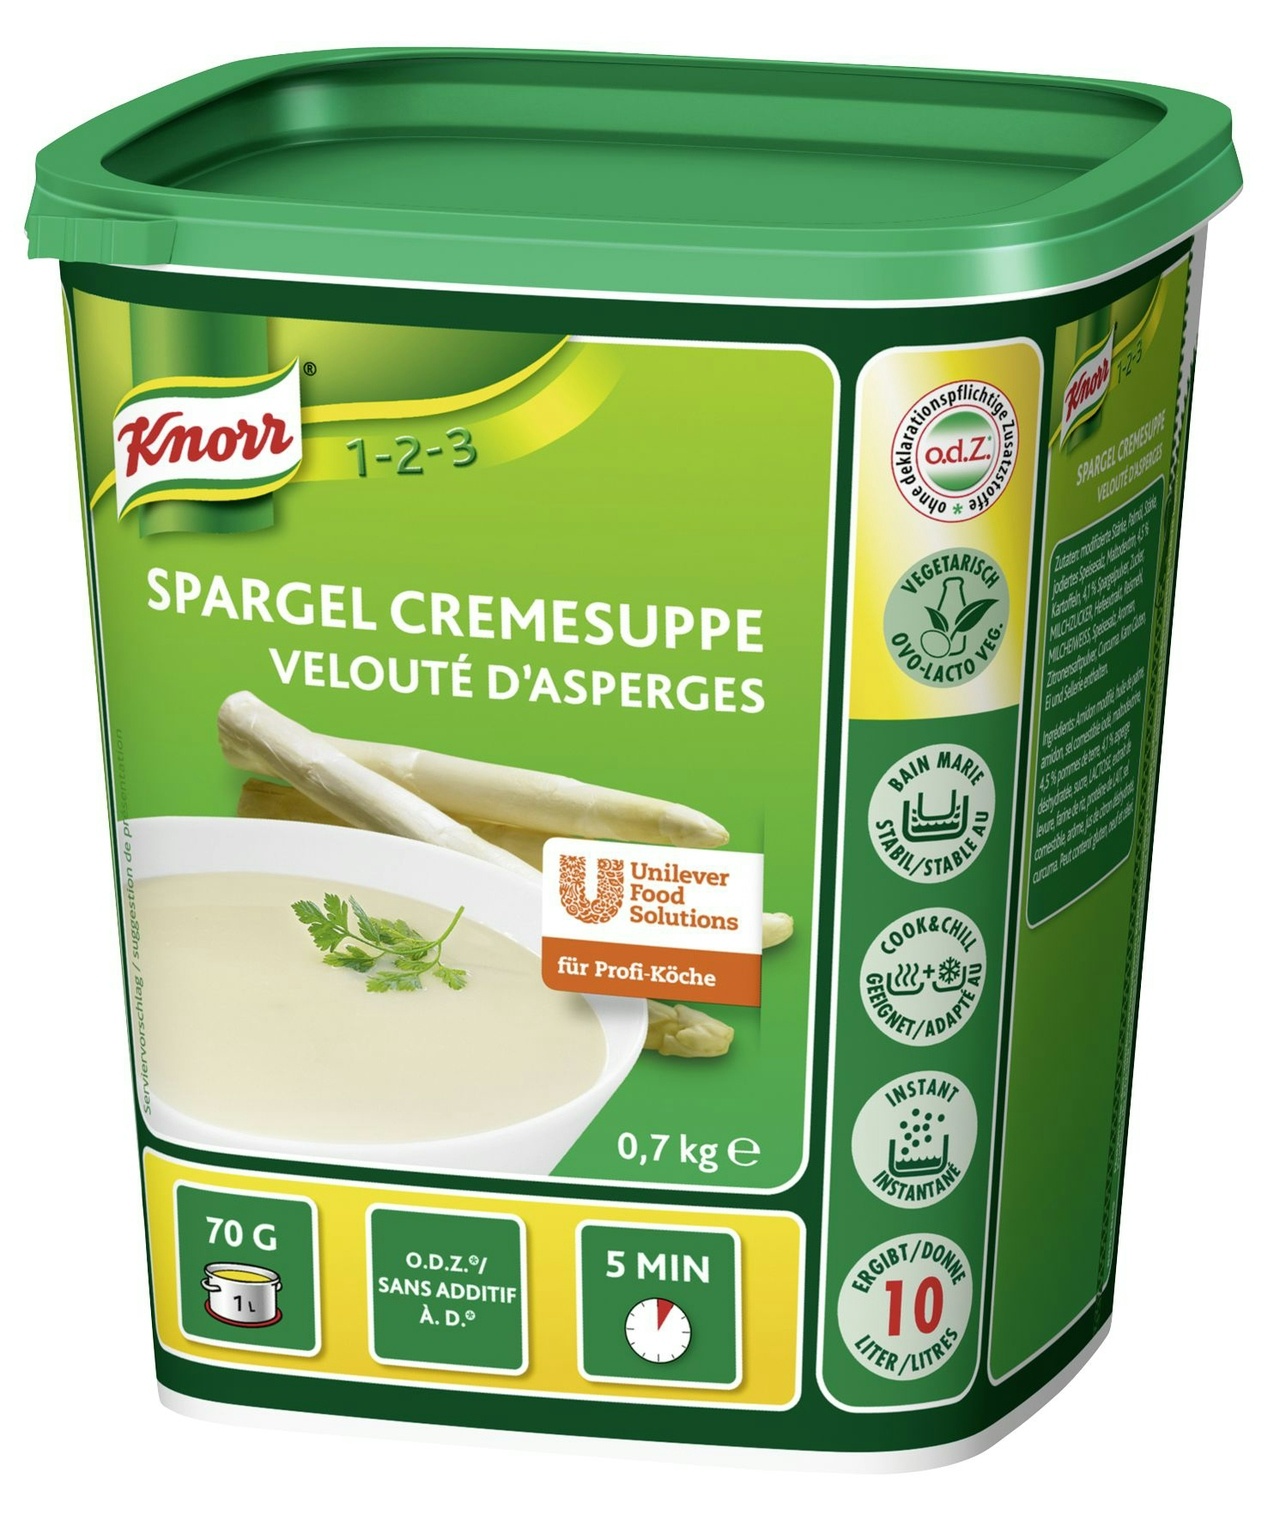 Knorr Spargelcremesuppe (700g)